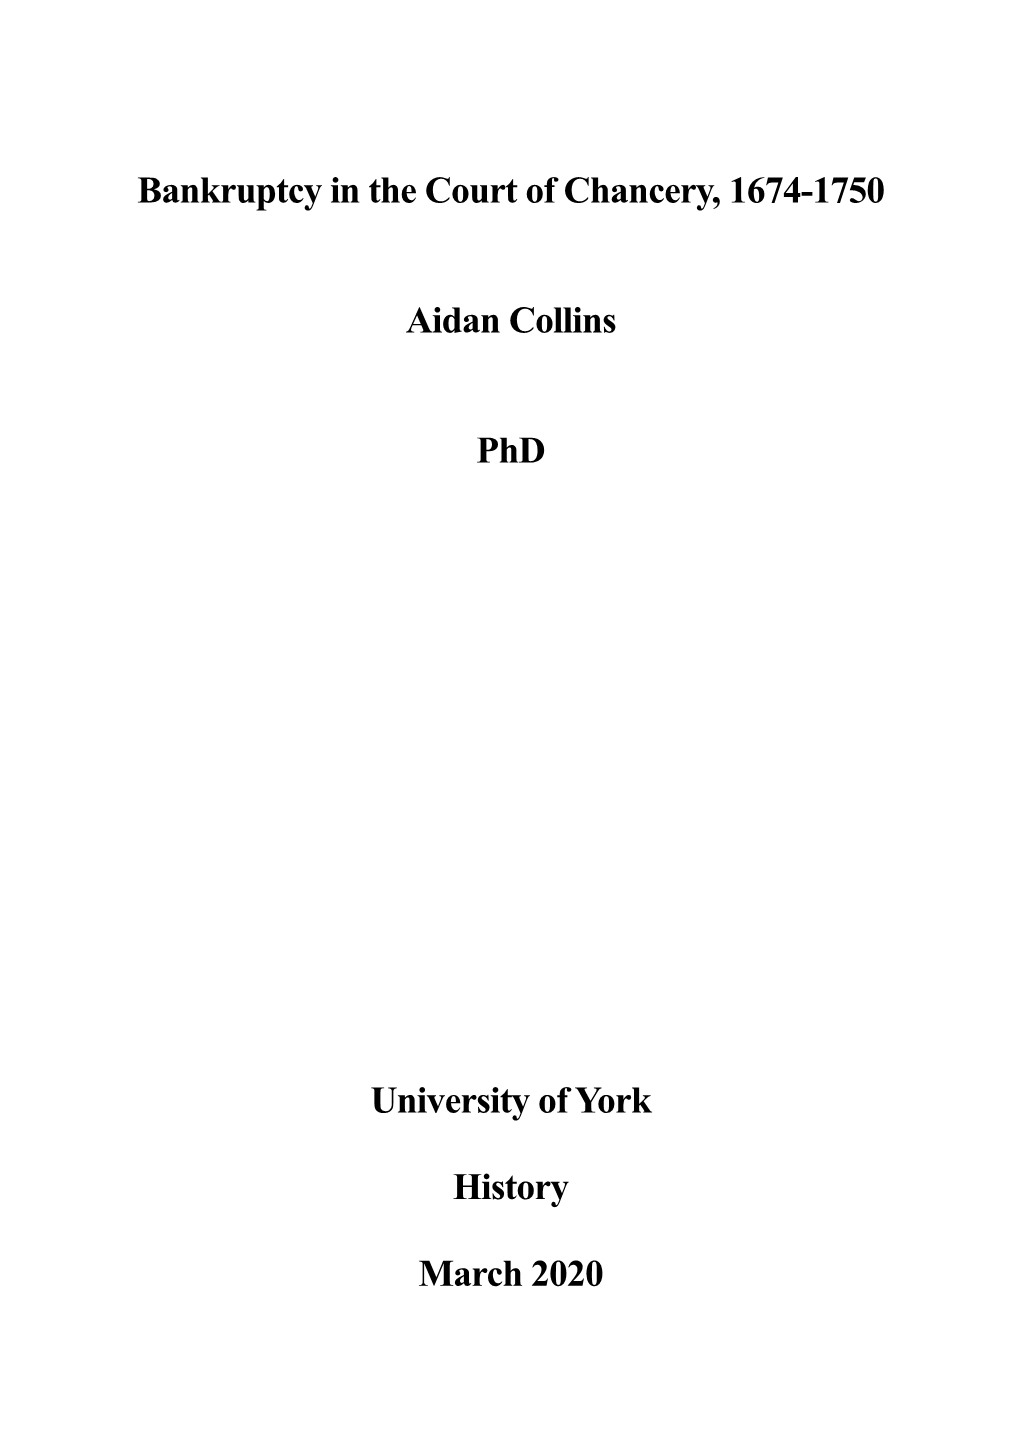 Bankruptcy in the Court of Chancery, 1674-1750 Aidan Collins Phd